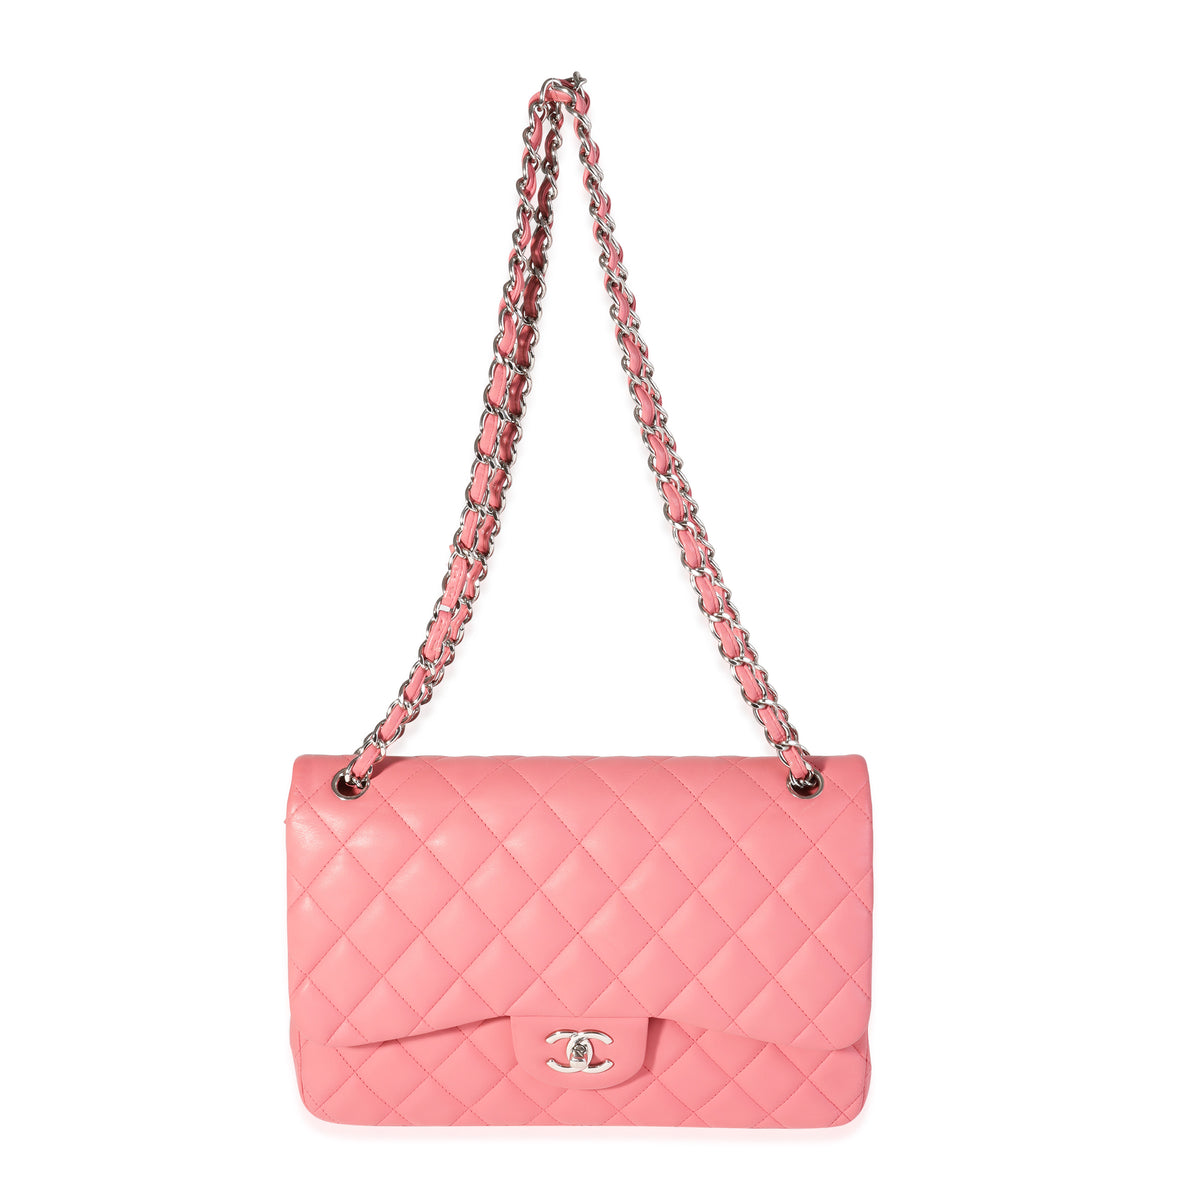 Chanel Pink Quilted Caviar Medium Classic Double Flap Bag, myGemma